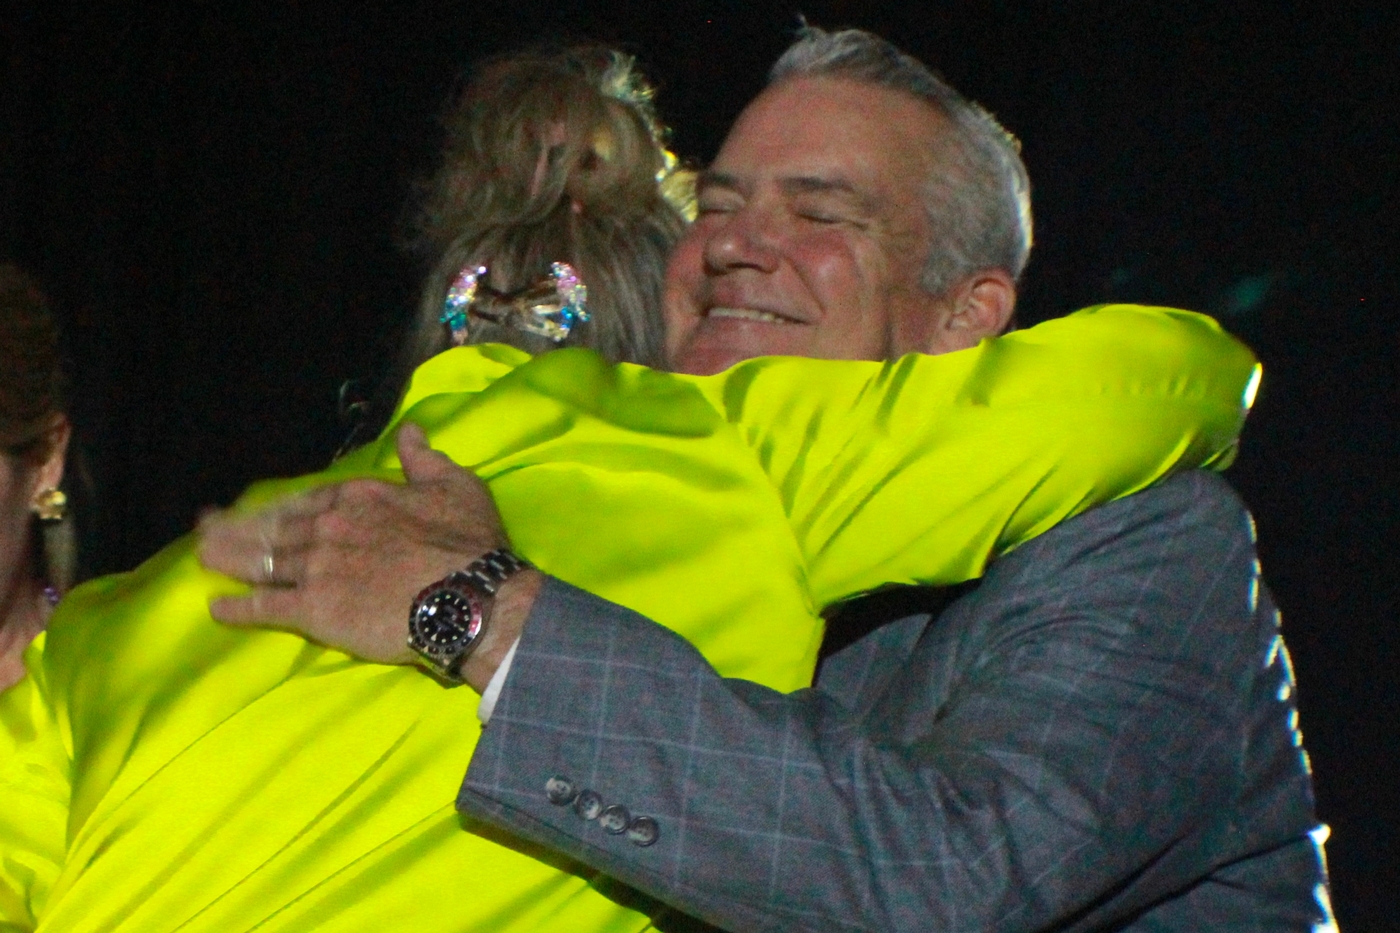 head of school and honoree embrace in a hug